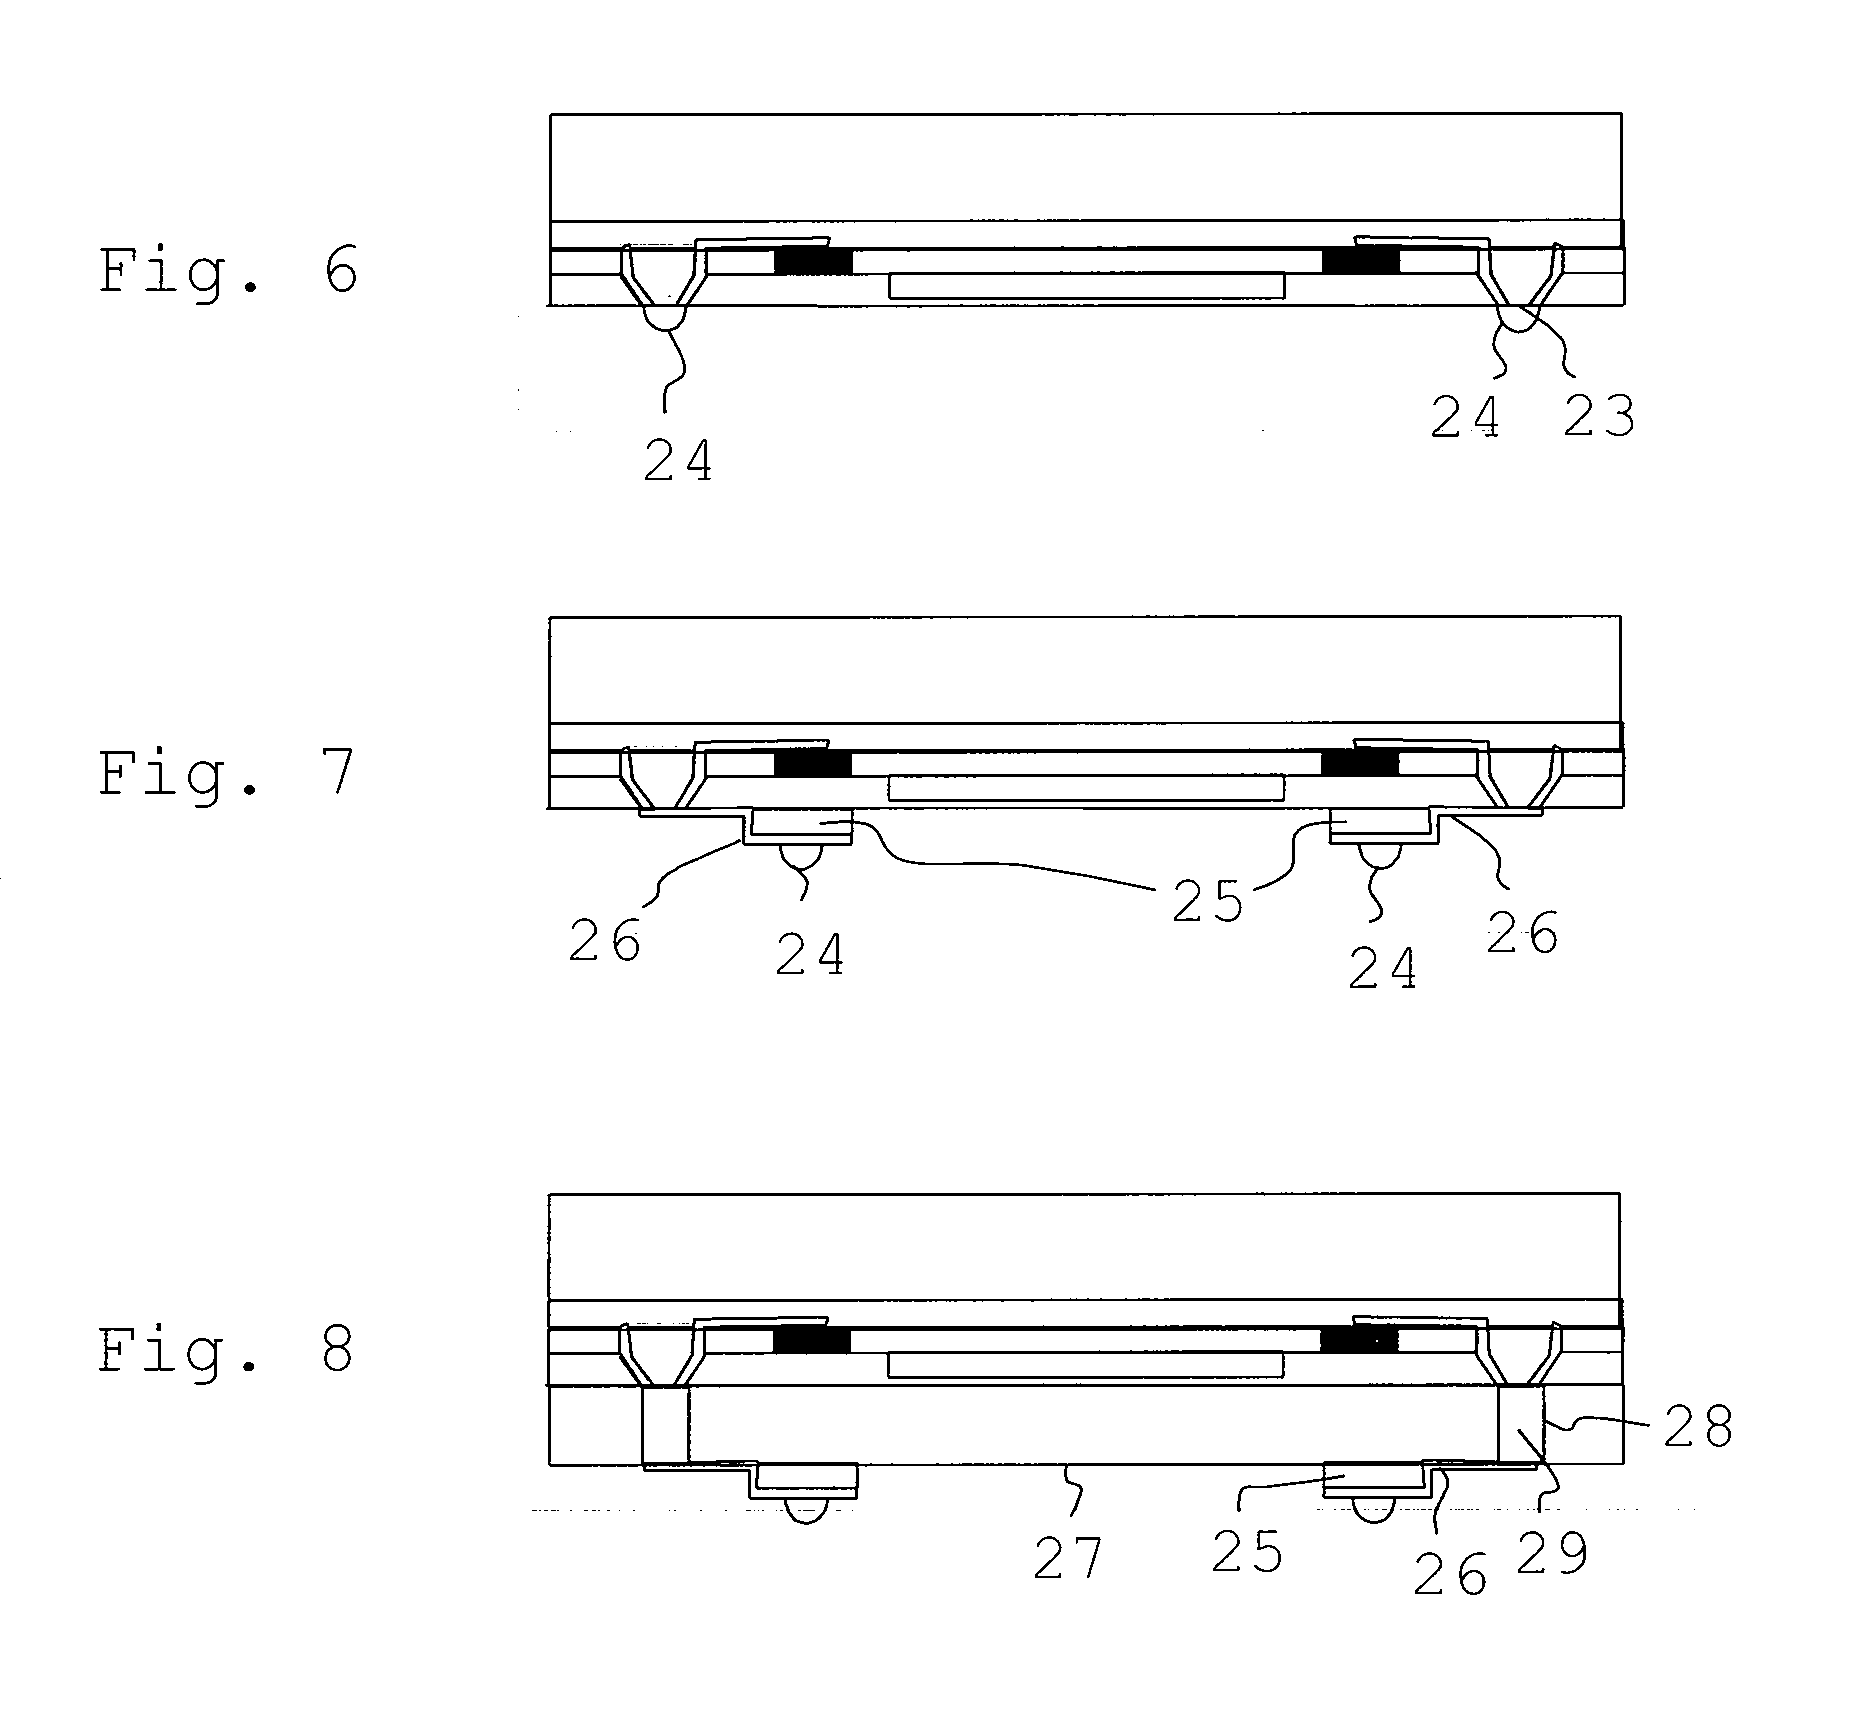 Process for making contact with and housing integrated circuits